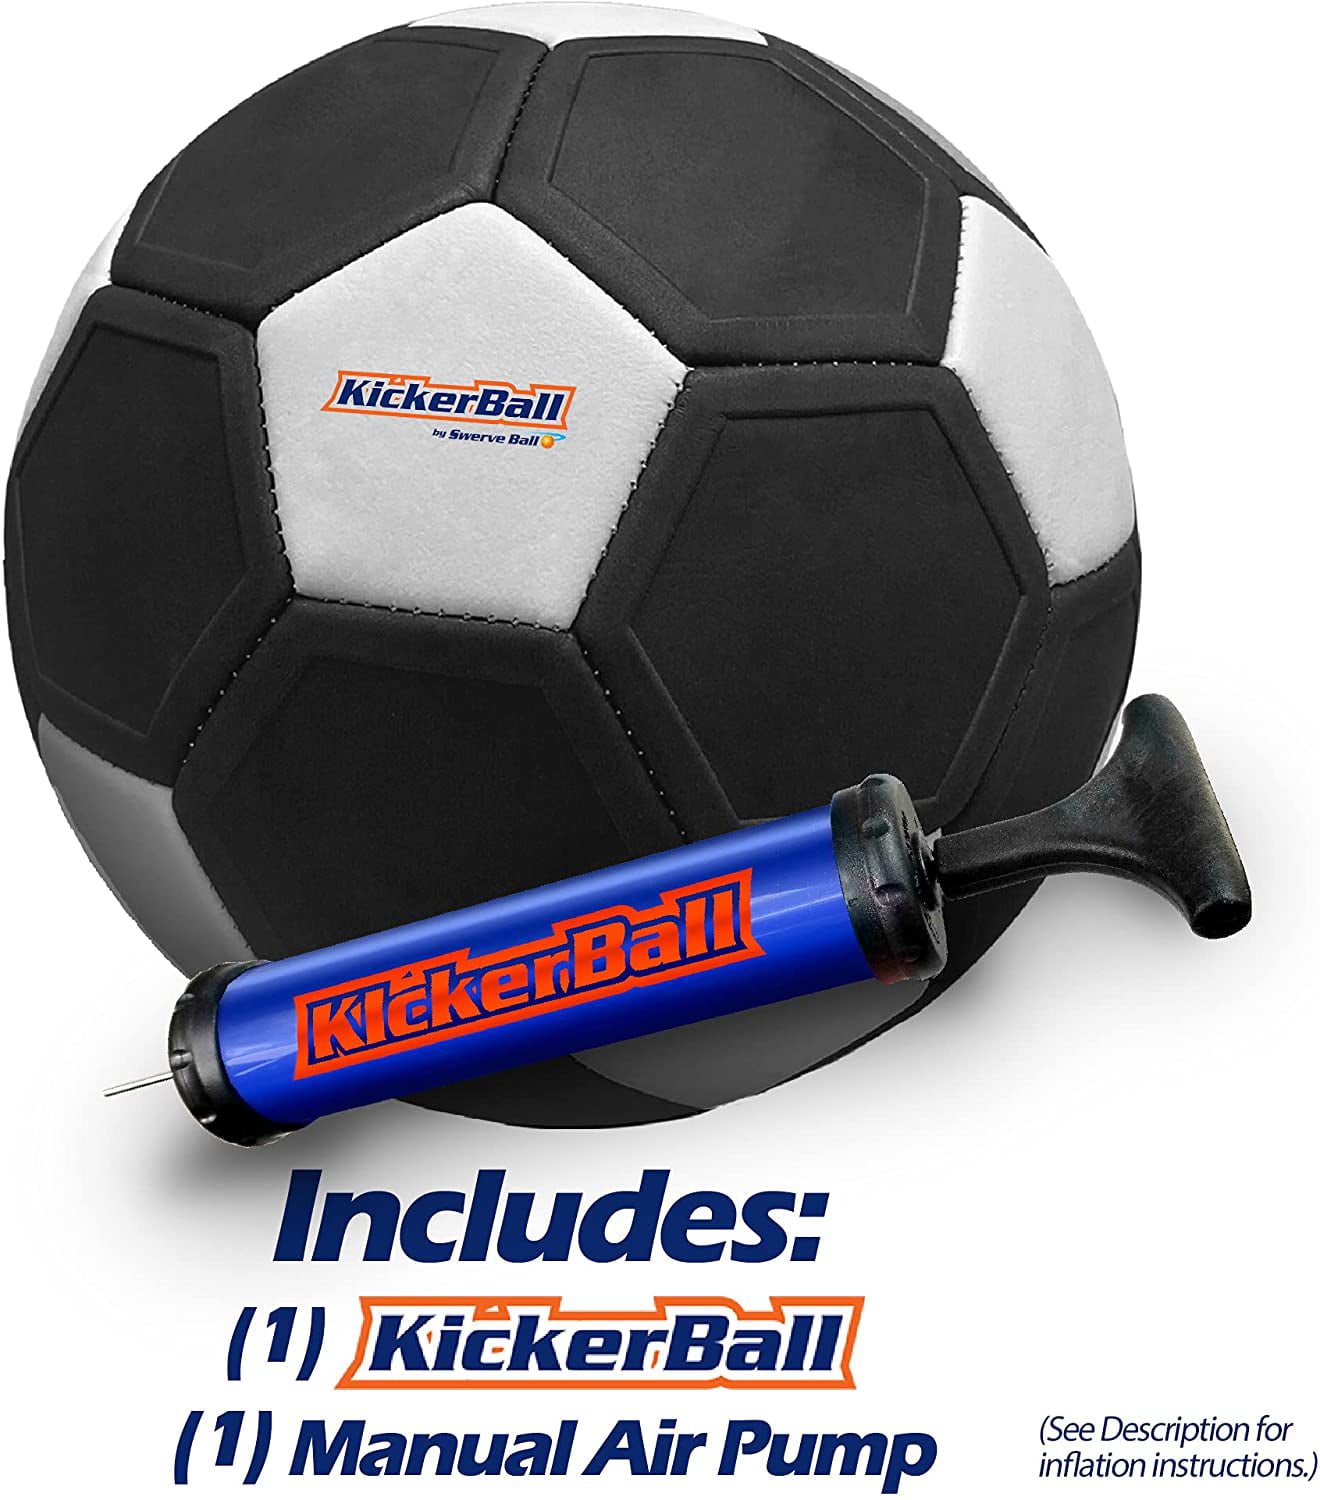 Kickerball Curve and Swerve Ball, Punky Pink, 1 - Kroger